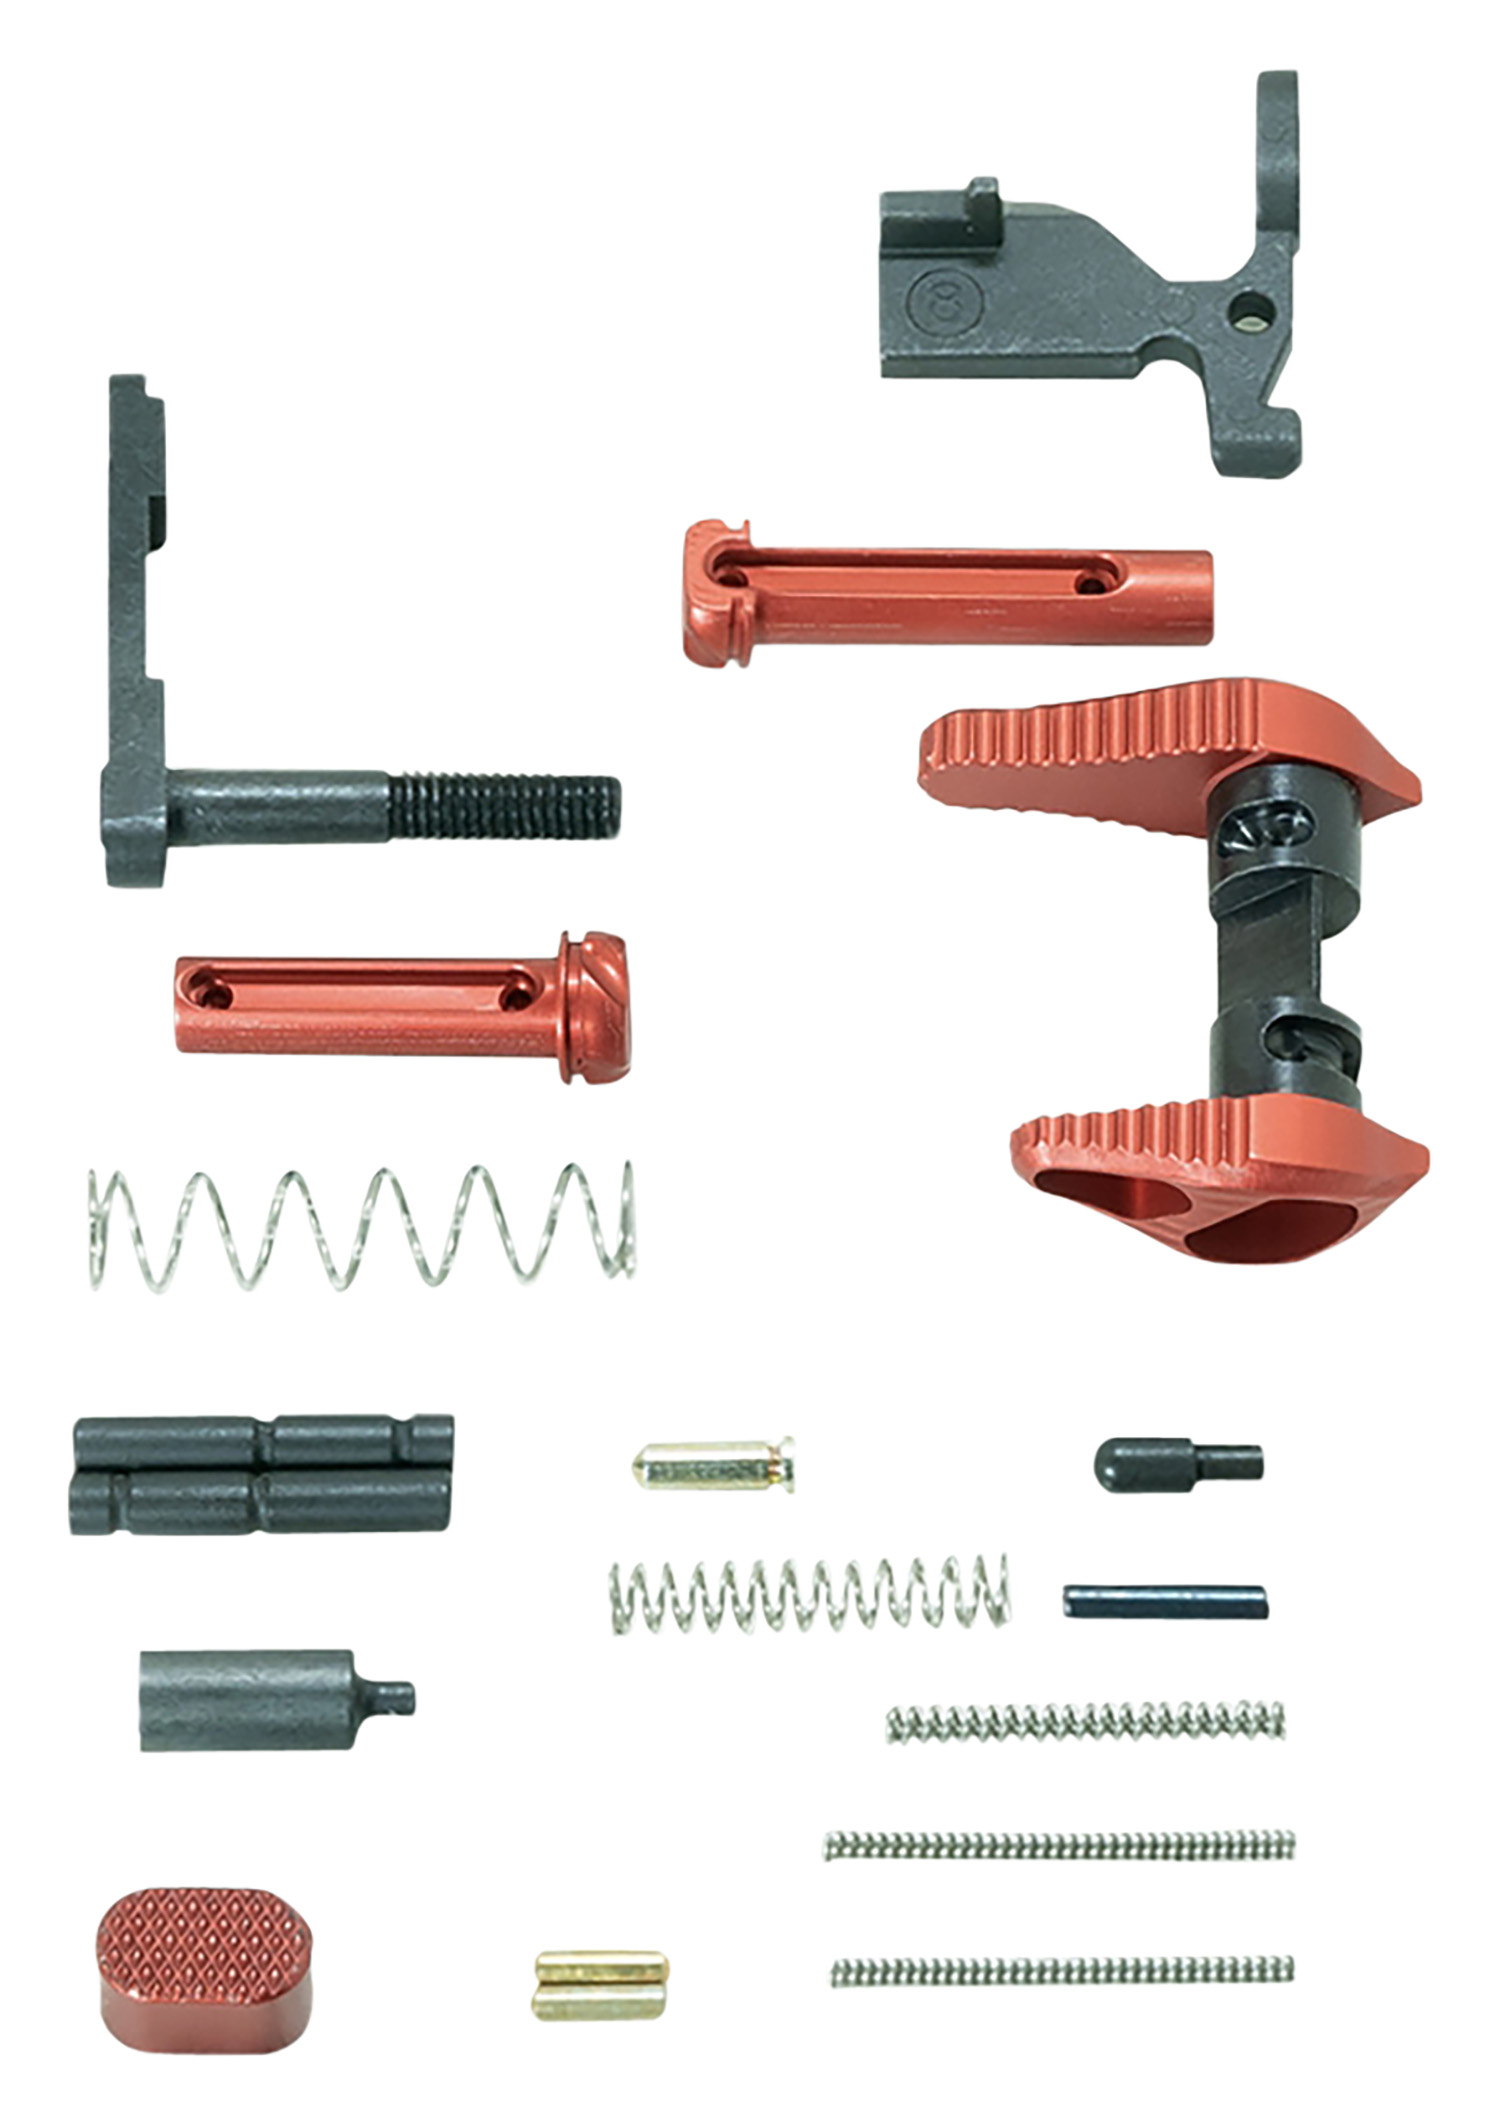 Timber Creek Outdoors ARLPKR Lower Parts Kit  Red Anodized Aluminum for AR-15